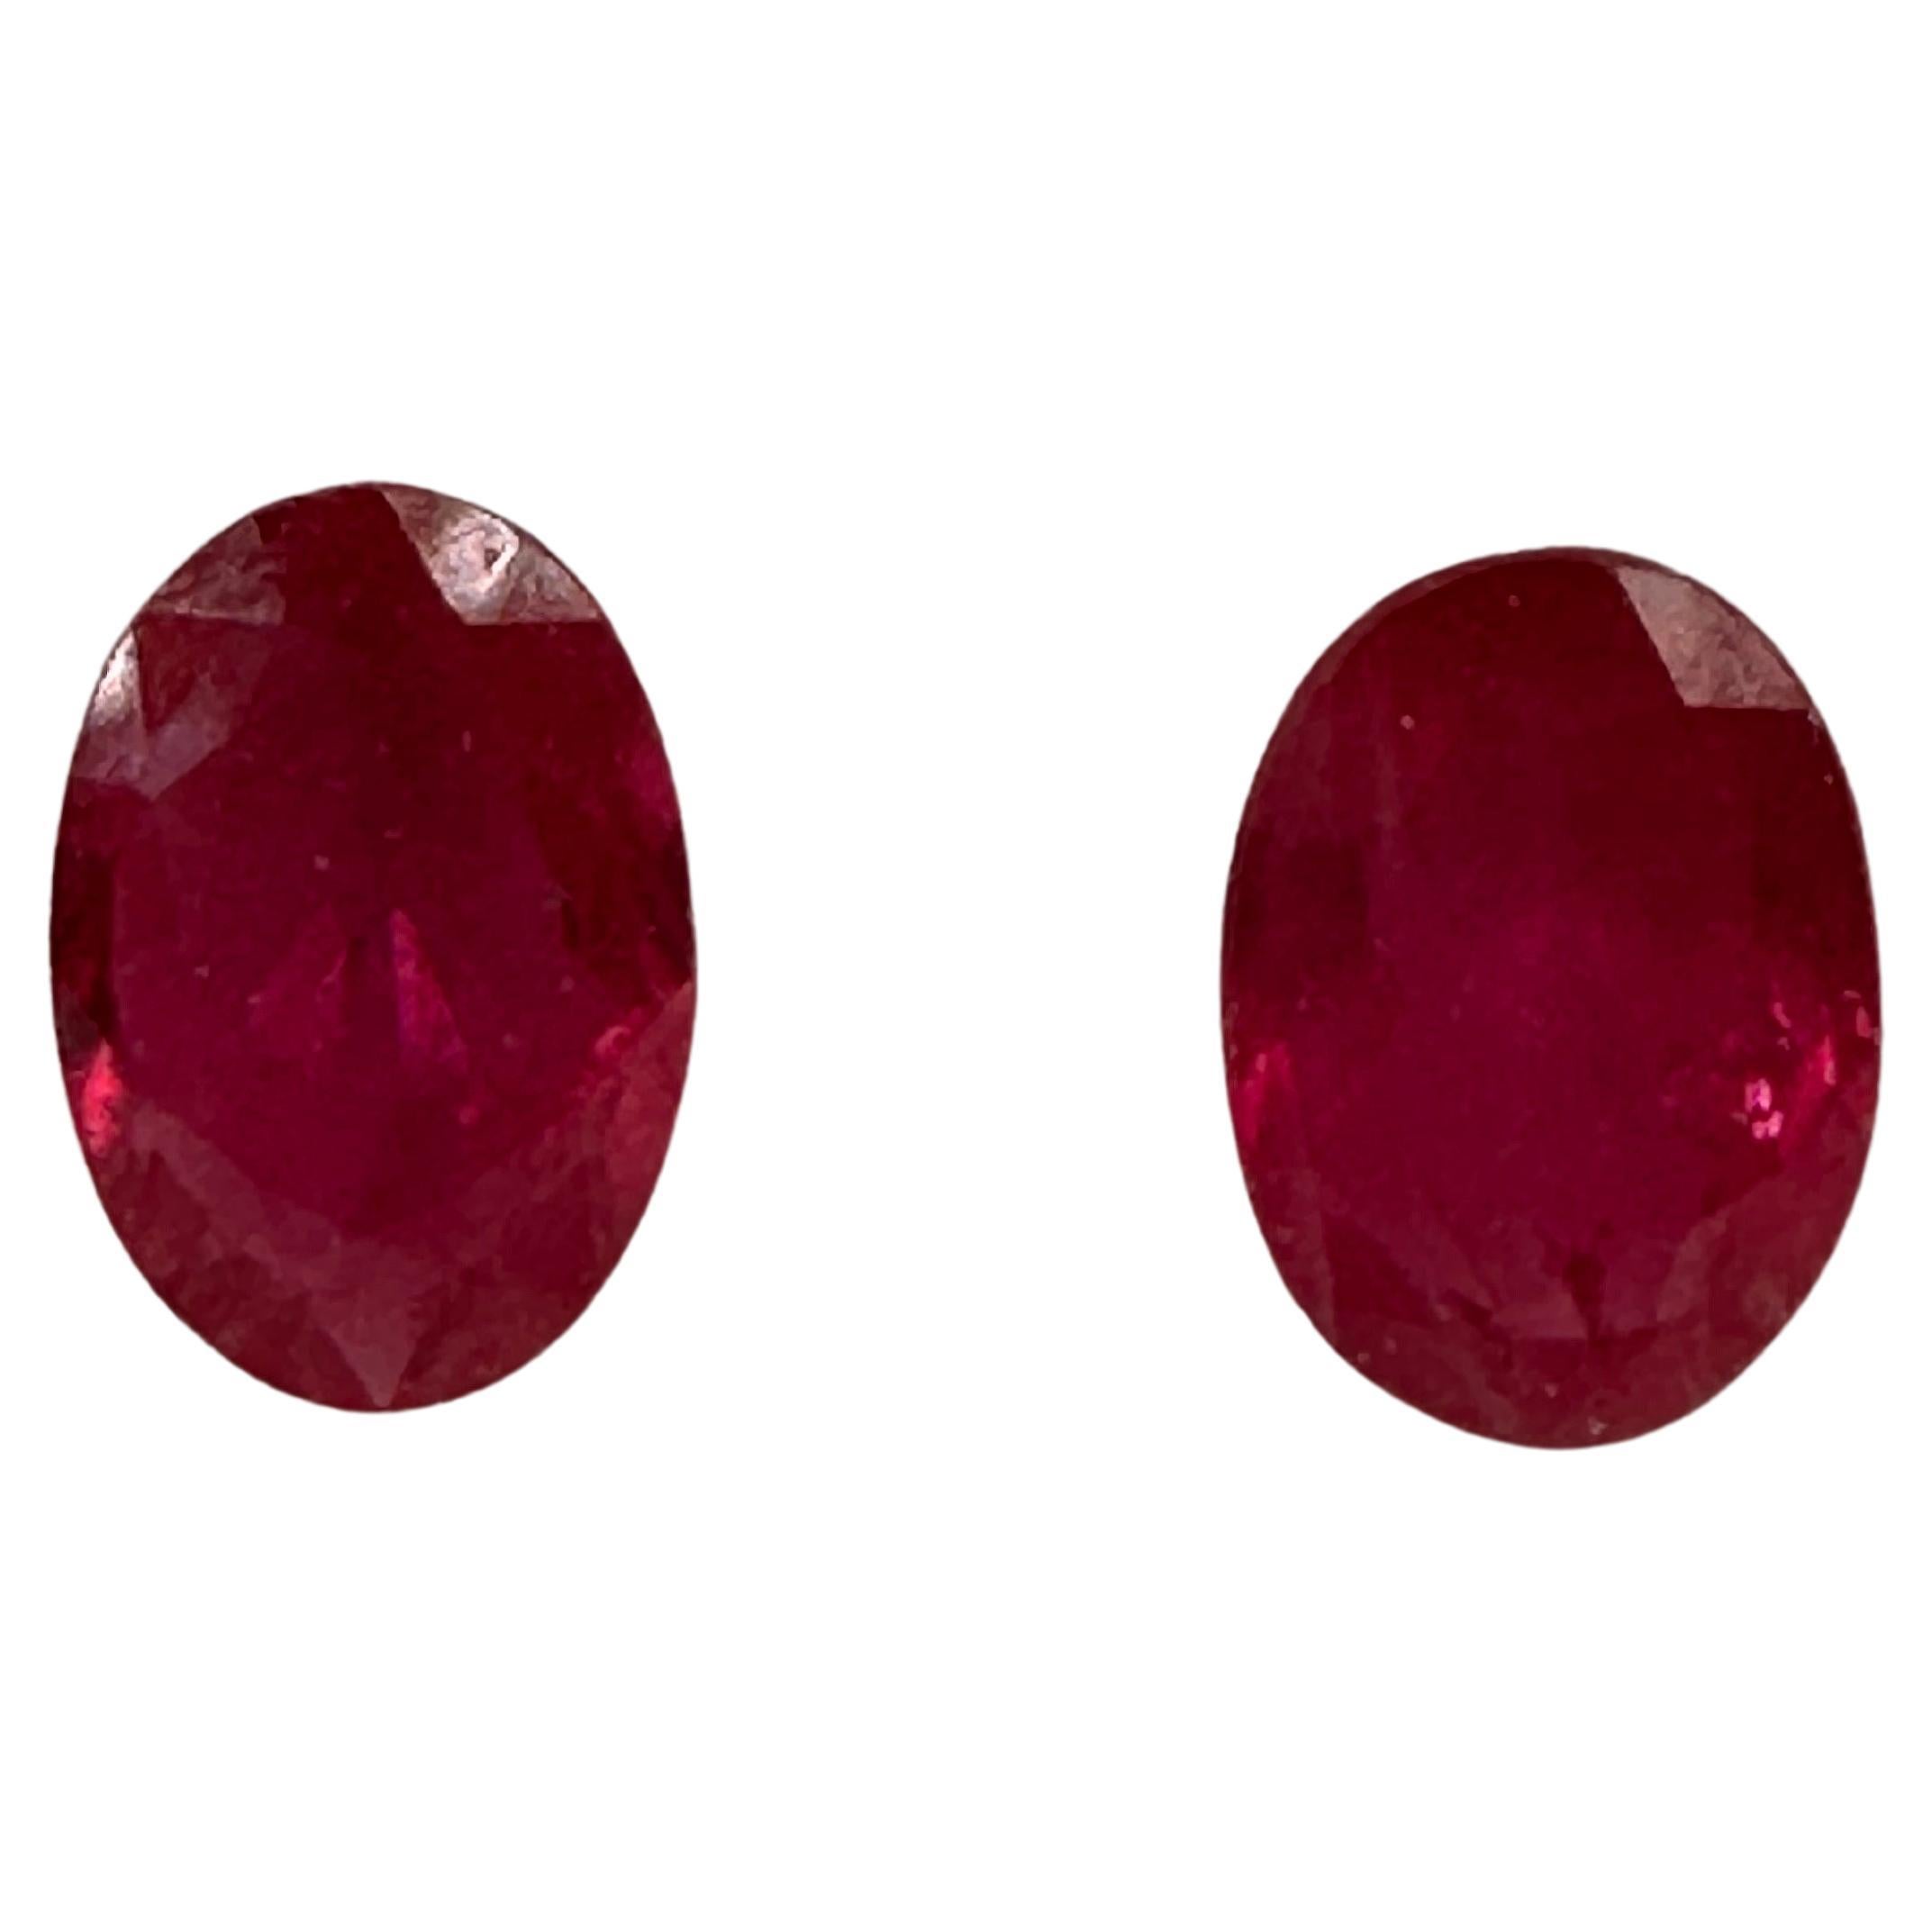 Matching ruby pair untreated 6.5x4.5mm ruby oval natural pinkish red For Sale